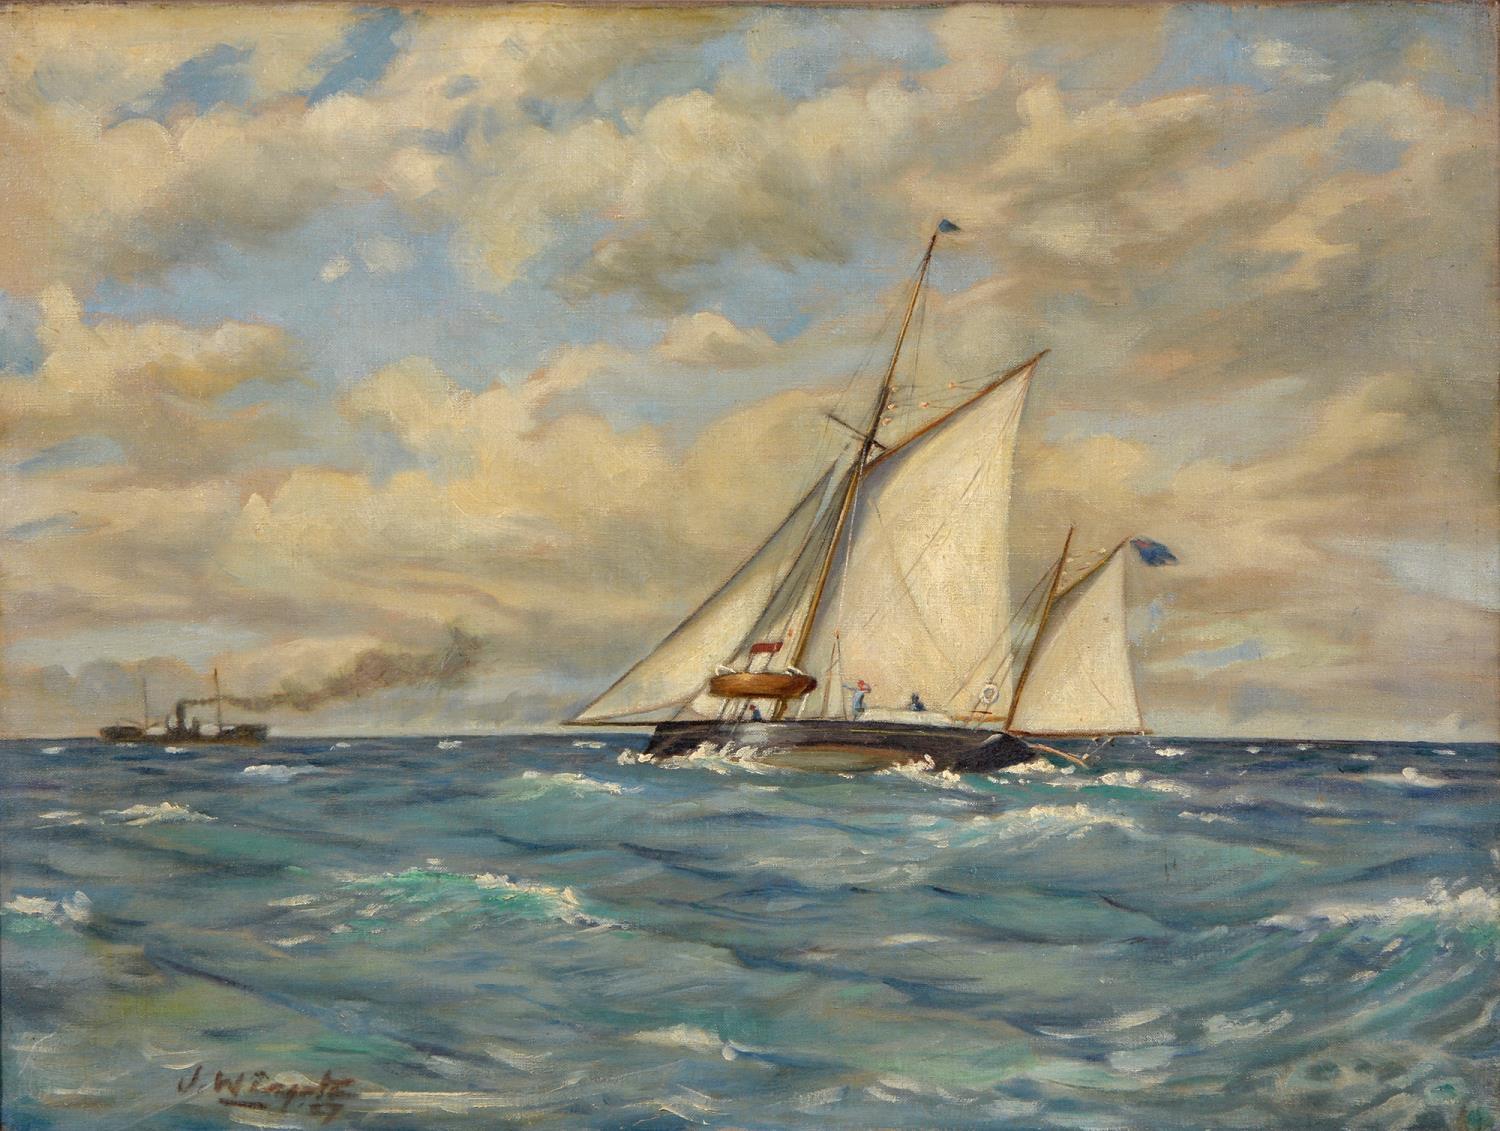 English Impressionist Signed Oil Painting Sailing Yacht at Sea with Tug Boat 